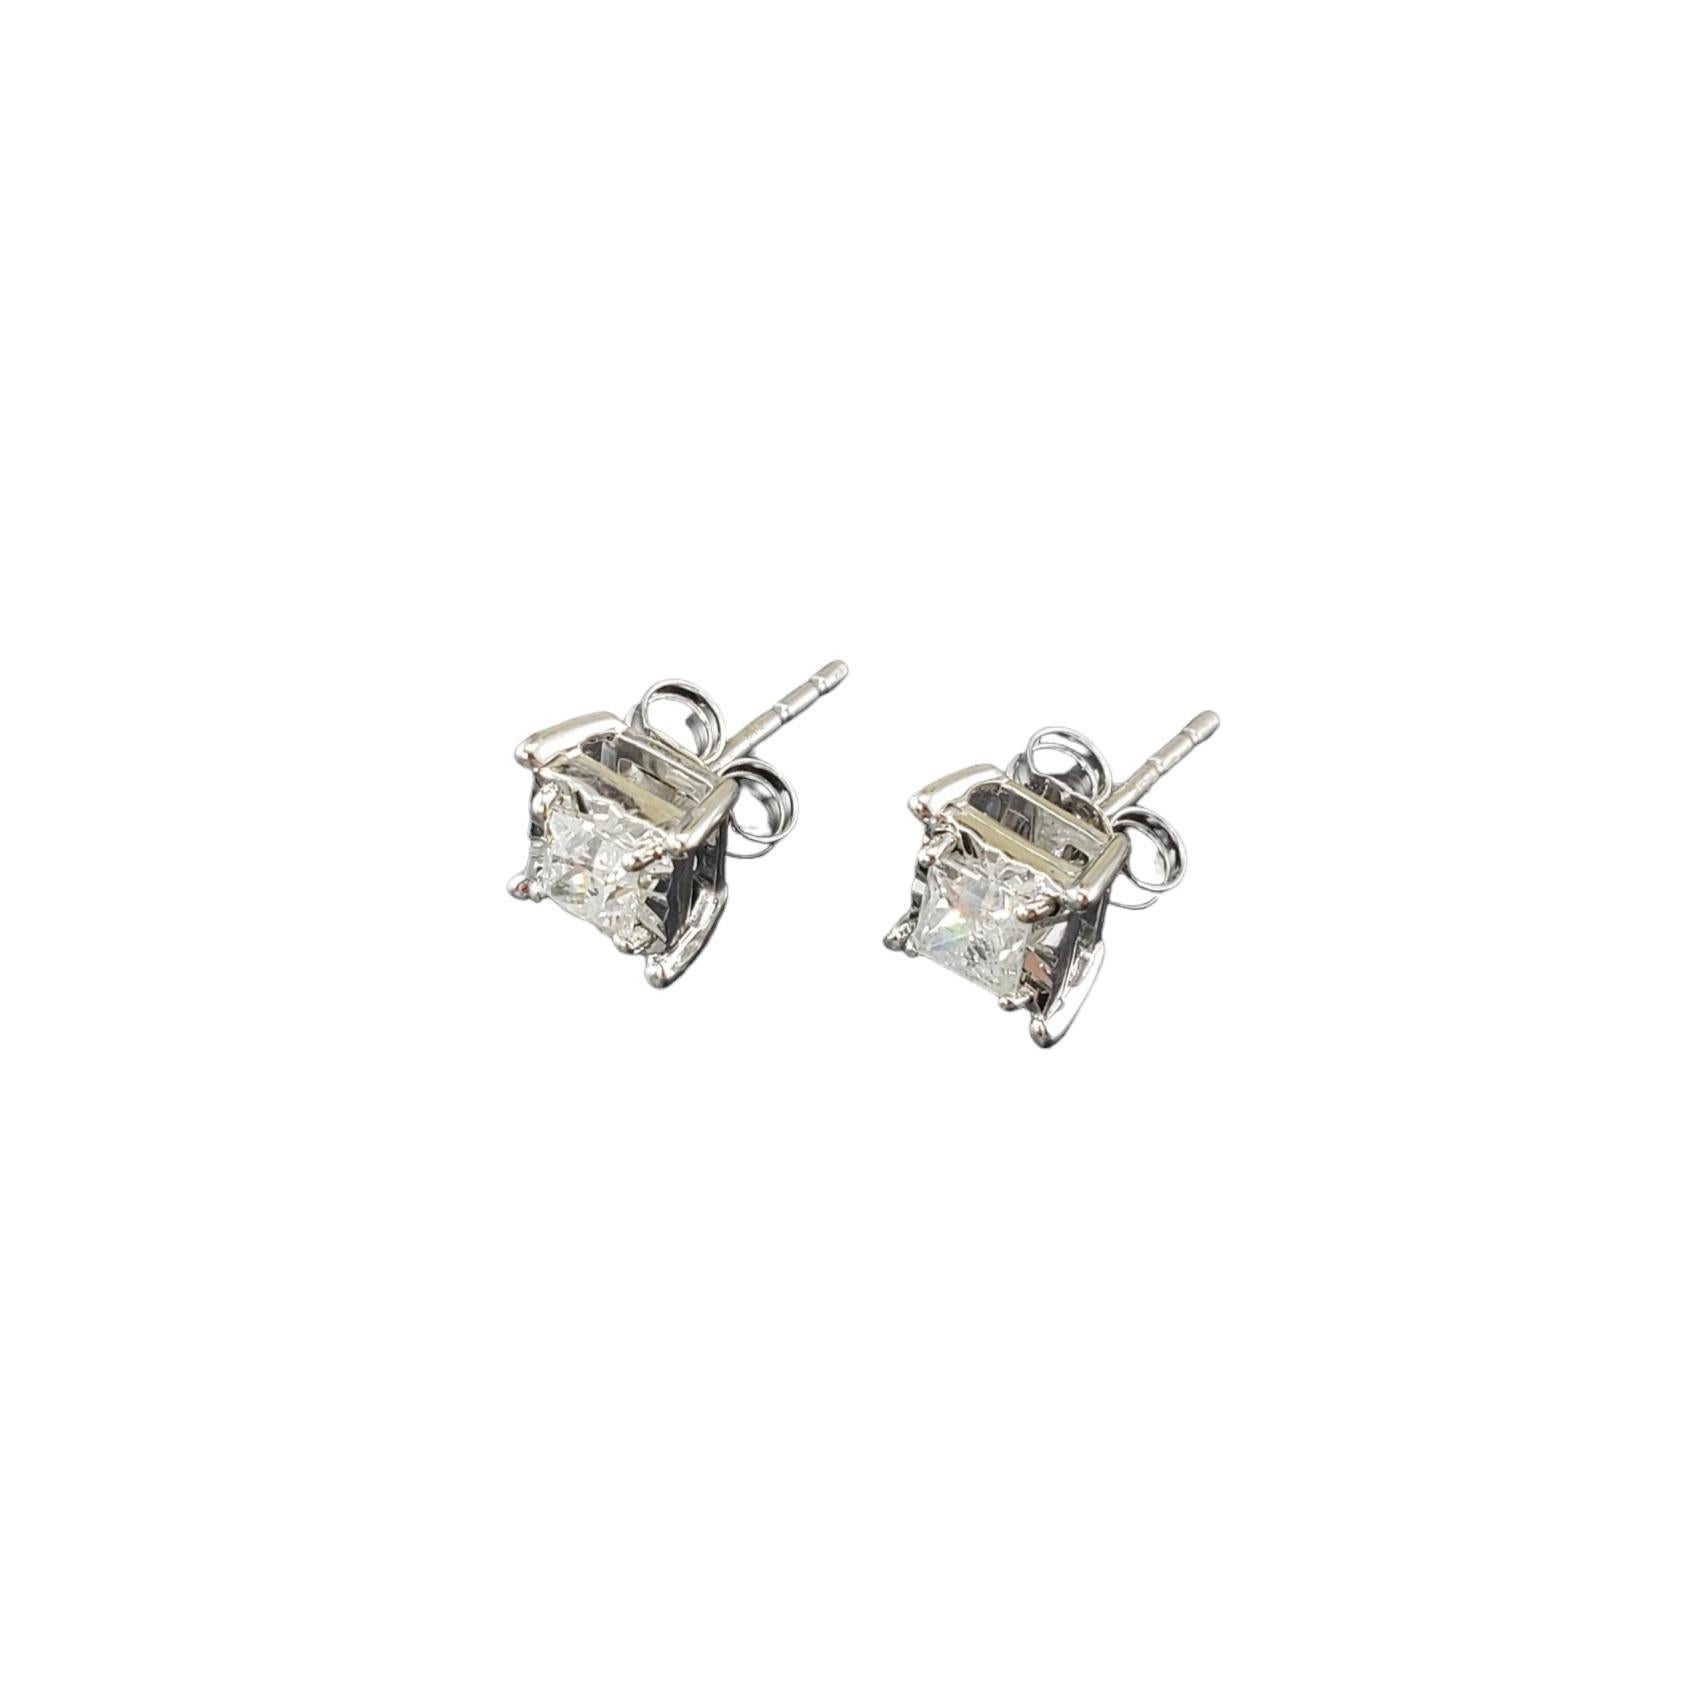 10 Karat White Gold and Princess Diamond Stud Earrings #17238 In Good Condition For Sale In Washington Depot, CT